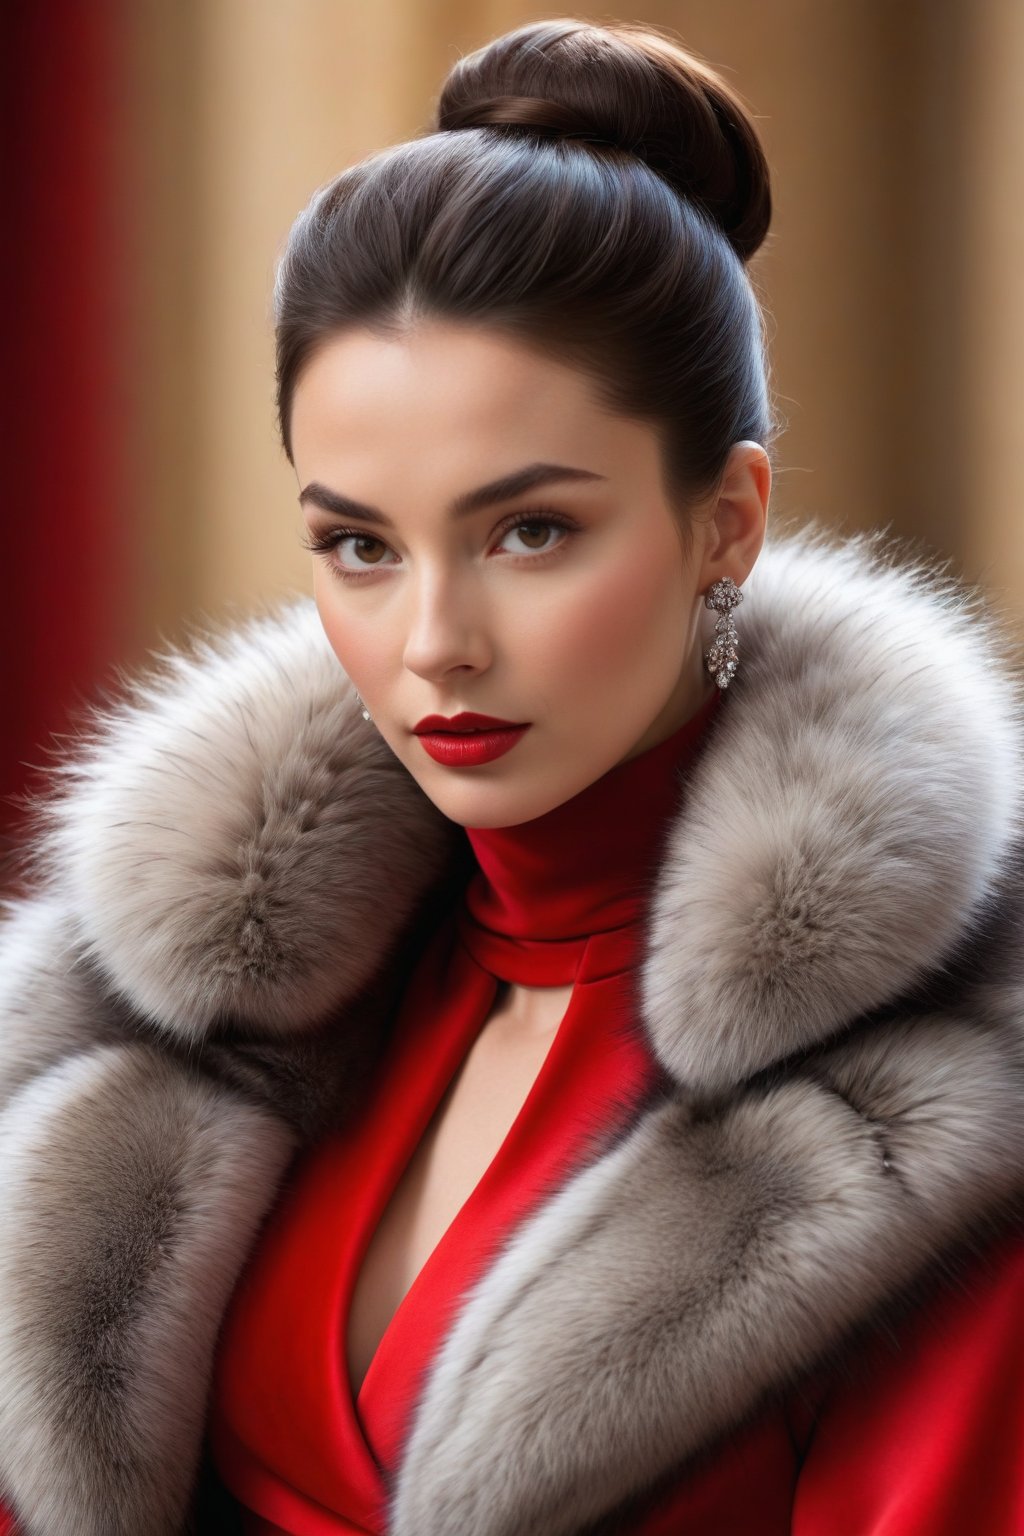 best quality, masterpiece,	
A Hollywood starlet, channeling the allure of a beautiful Spanish girl, exudes Rococo glamour in a red fur outfit, accented with a fur-trim capelet, her dark brown hair elegantly styled in a bun. Her ensemble is completed with fashionable accessories, blending opulence with a modern chic that captures the essence of timeless beauty and sophistication.
ultra realistic illustration, siena natural ratio, ultra hd, realistic, vivid colors, highly detailed, UHD drawing, perfect composition, ultra hd, 8k, he has an inner glow, stunning, something that even doesn't exist, mythical being, energy, molecular, textures, iridescent and luminescent scales, breathtaking beauty, pure perfection, divine presence, unforgettable, impressive, breathtaking beauty, Volumetric light, auras, rays, vivid colors reflects.